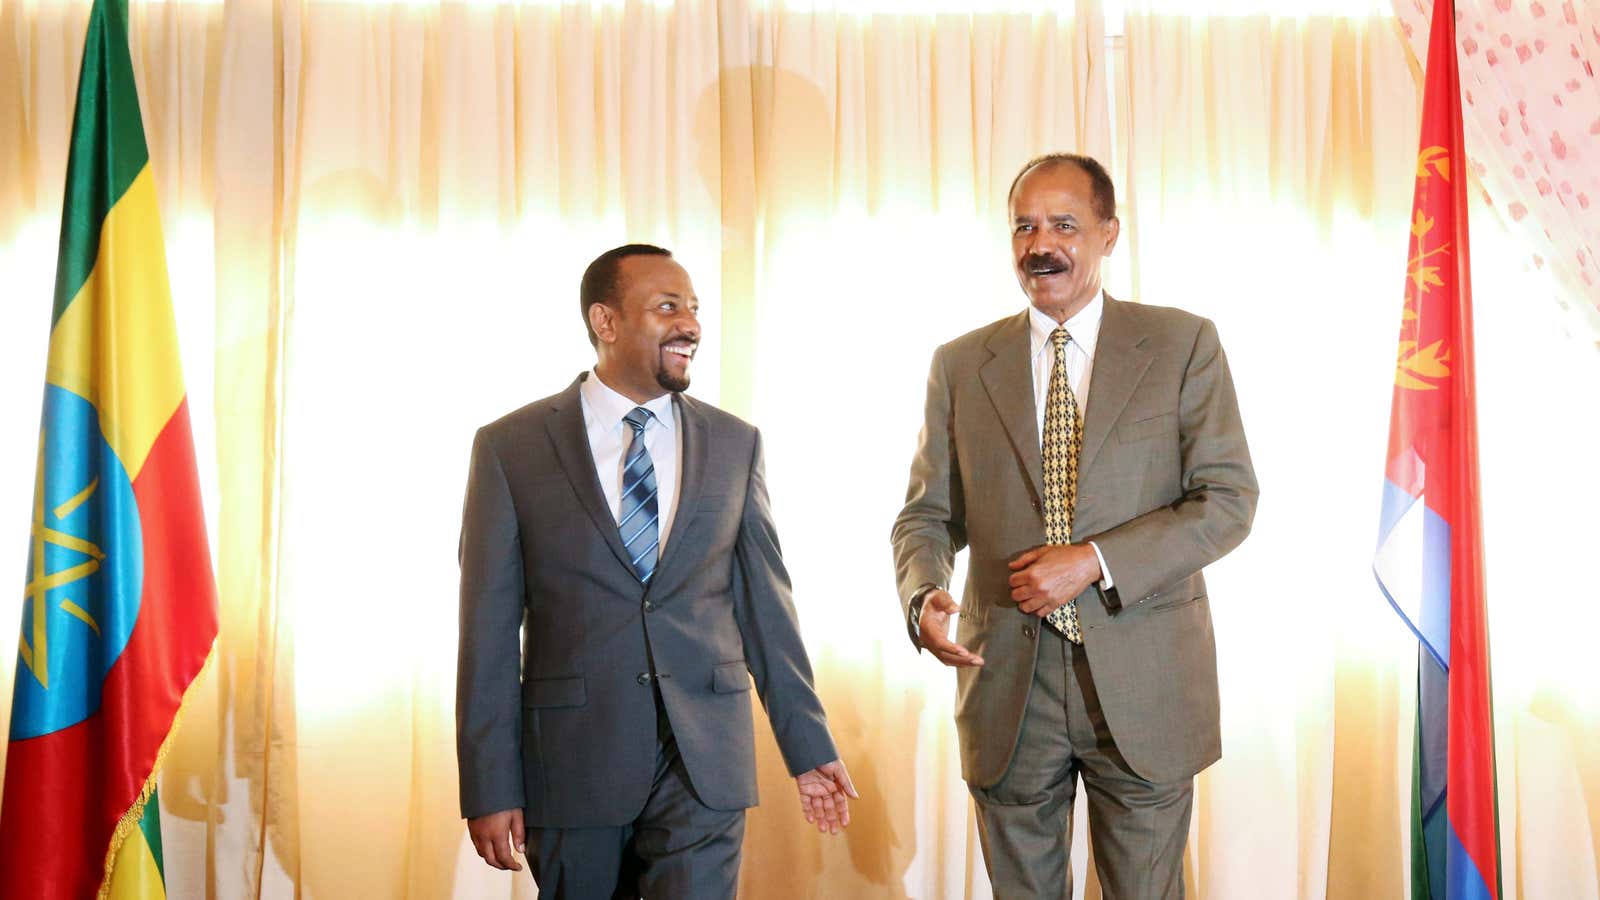 Eritrea’s president, Isaias Afwerki and Ethiopia’s prime minister, Abiy Ahmed in happier times last year